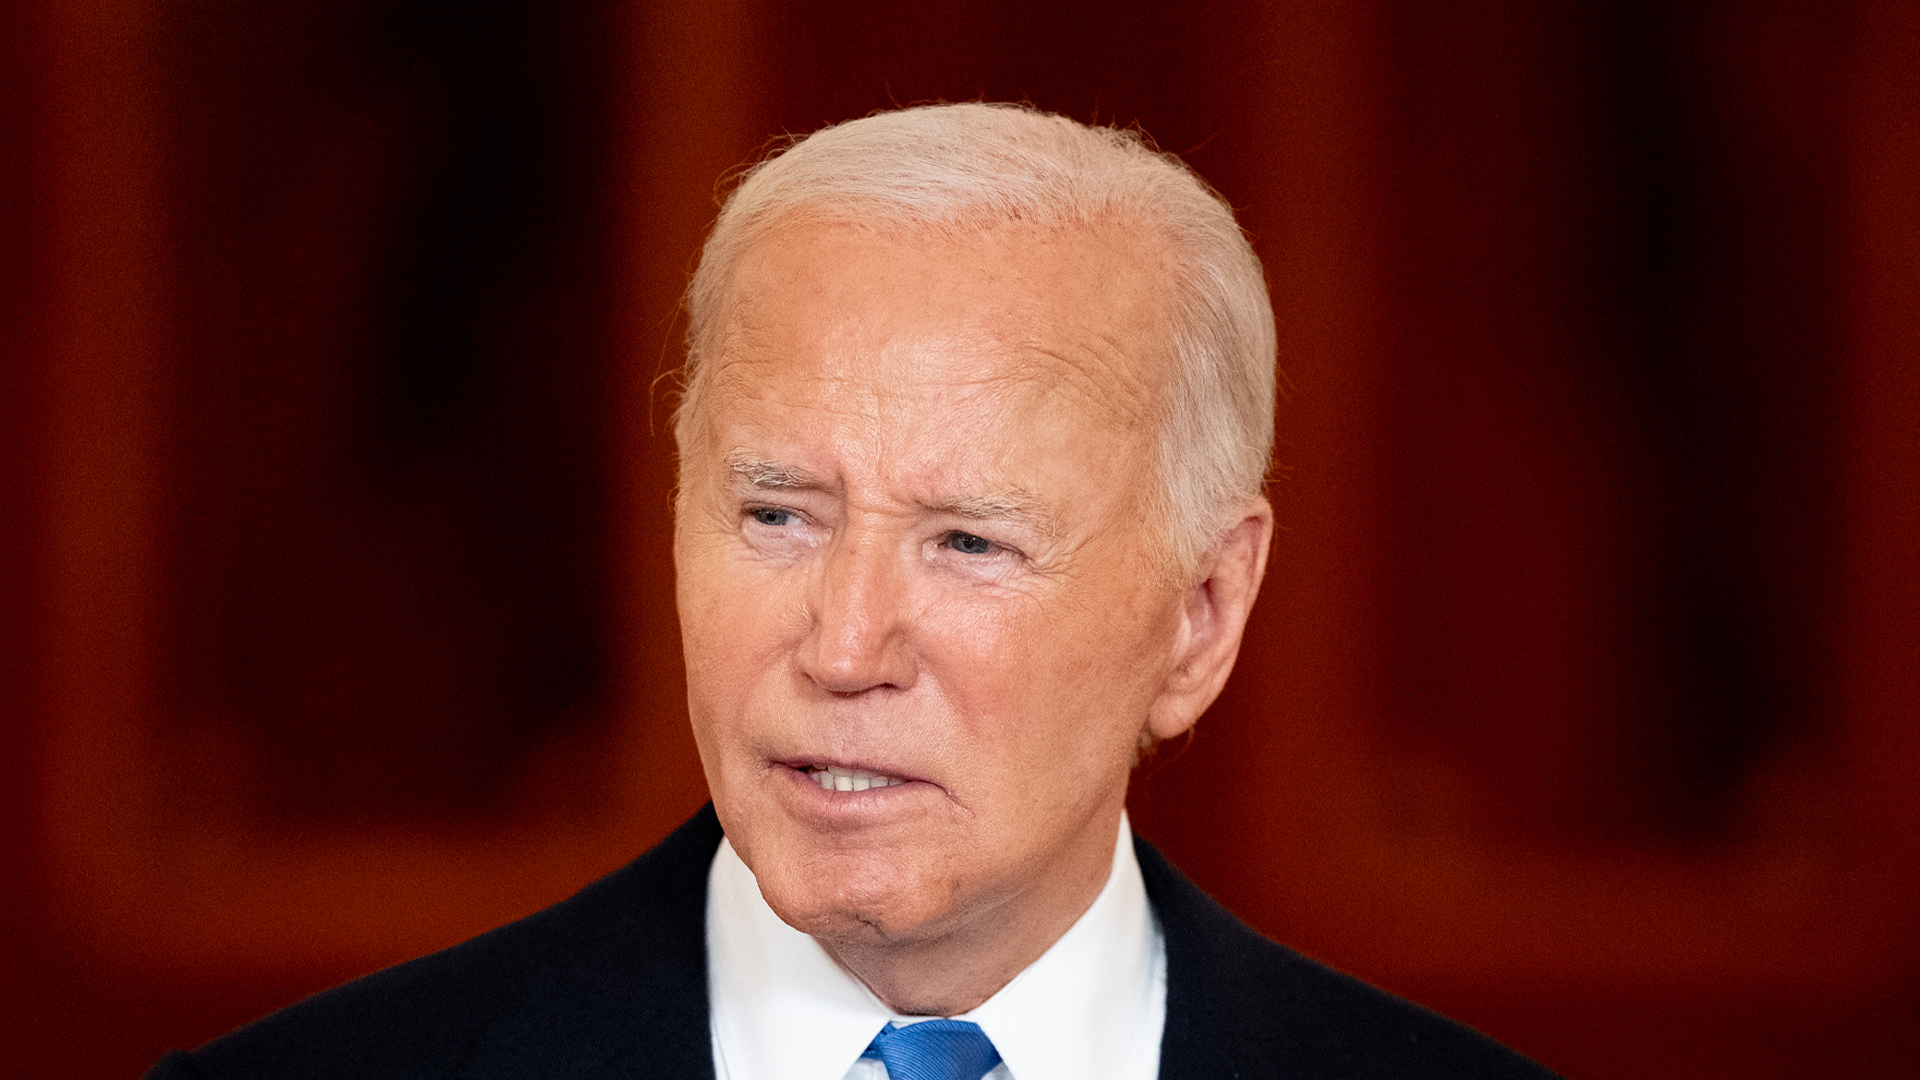 Joe Biden’s camp forced to deny president is ‘mulling dropping out’ as dementia question raised after debate disaster [Video]